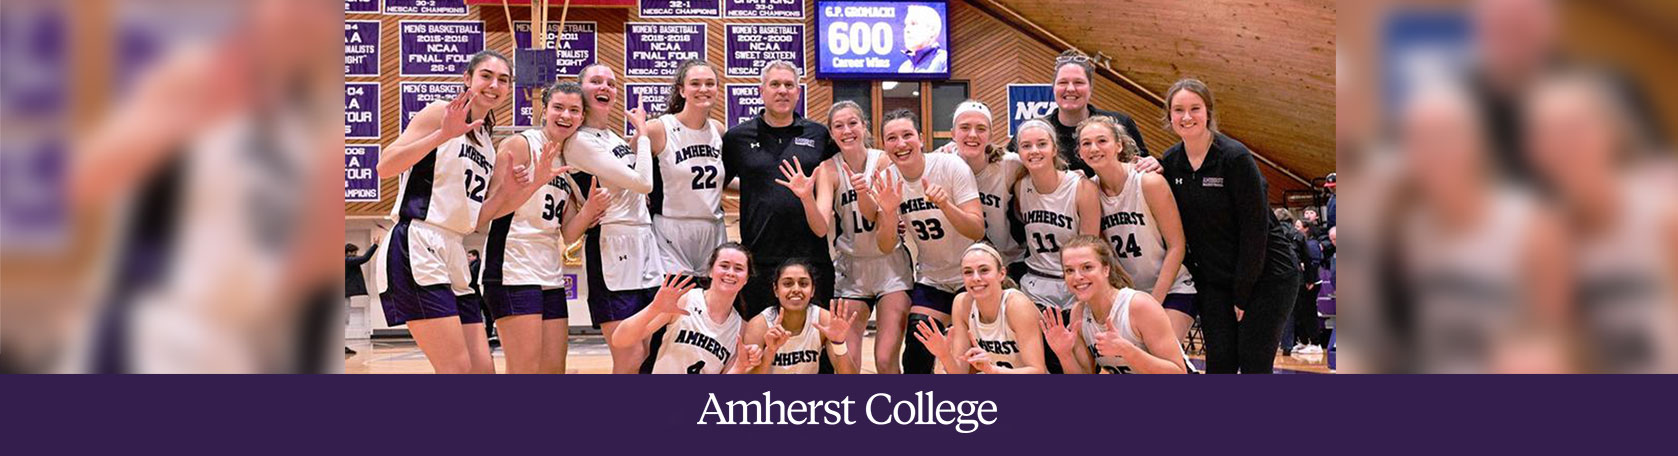 Coach G.P. Gromacki and the СCollege women's basketball team celebrate a win.